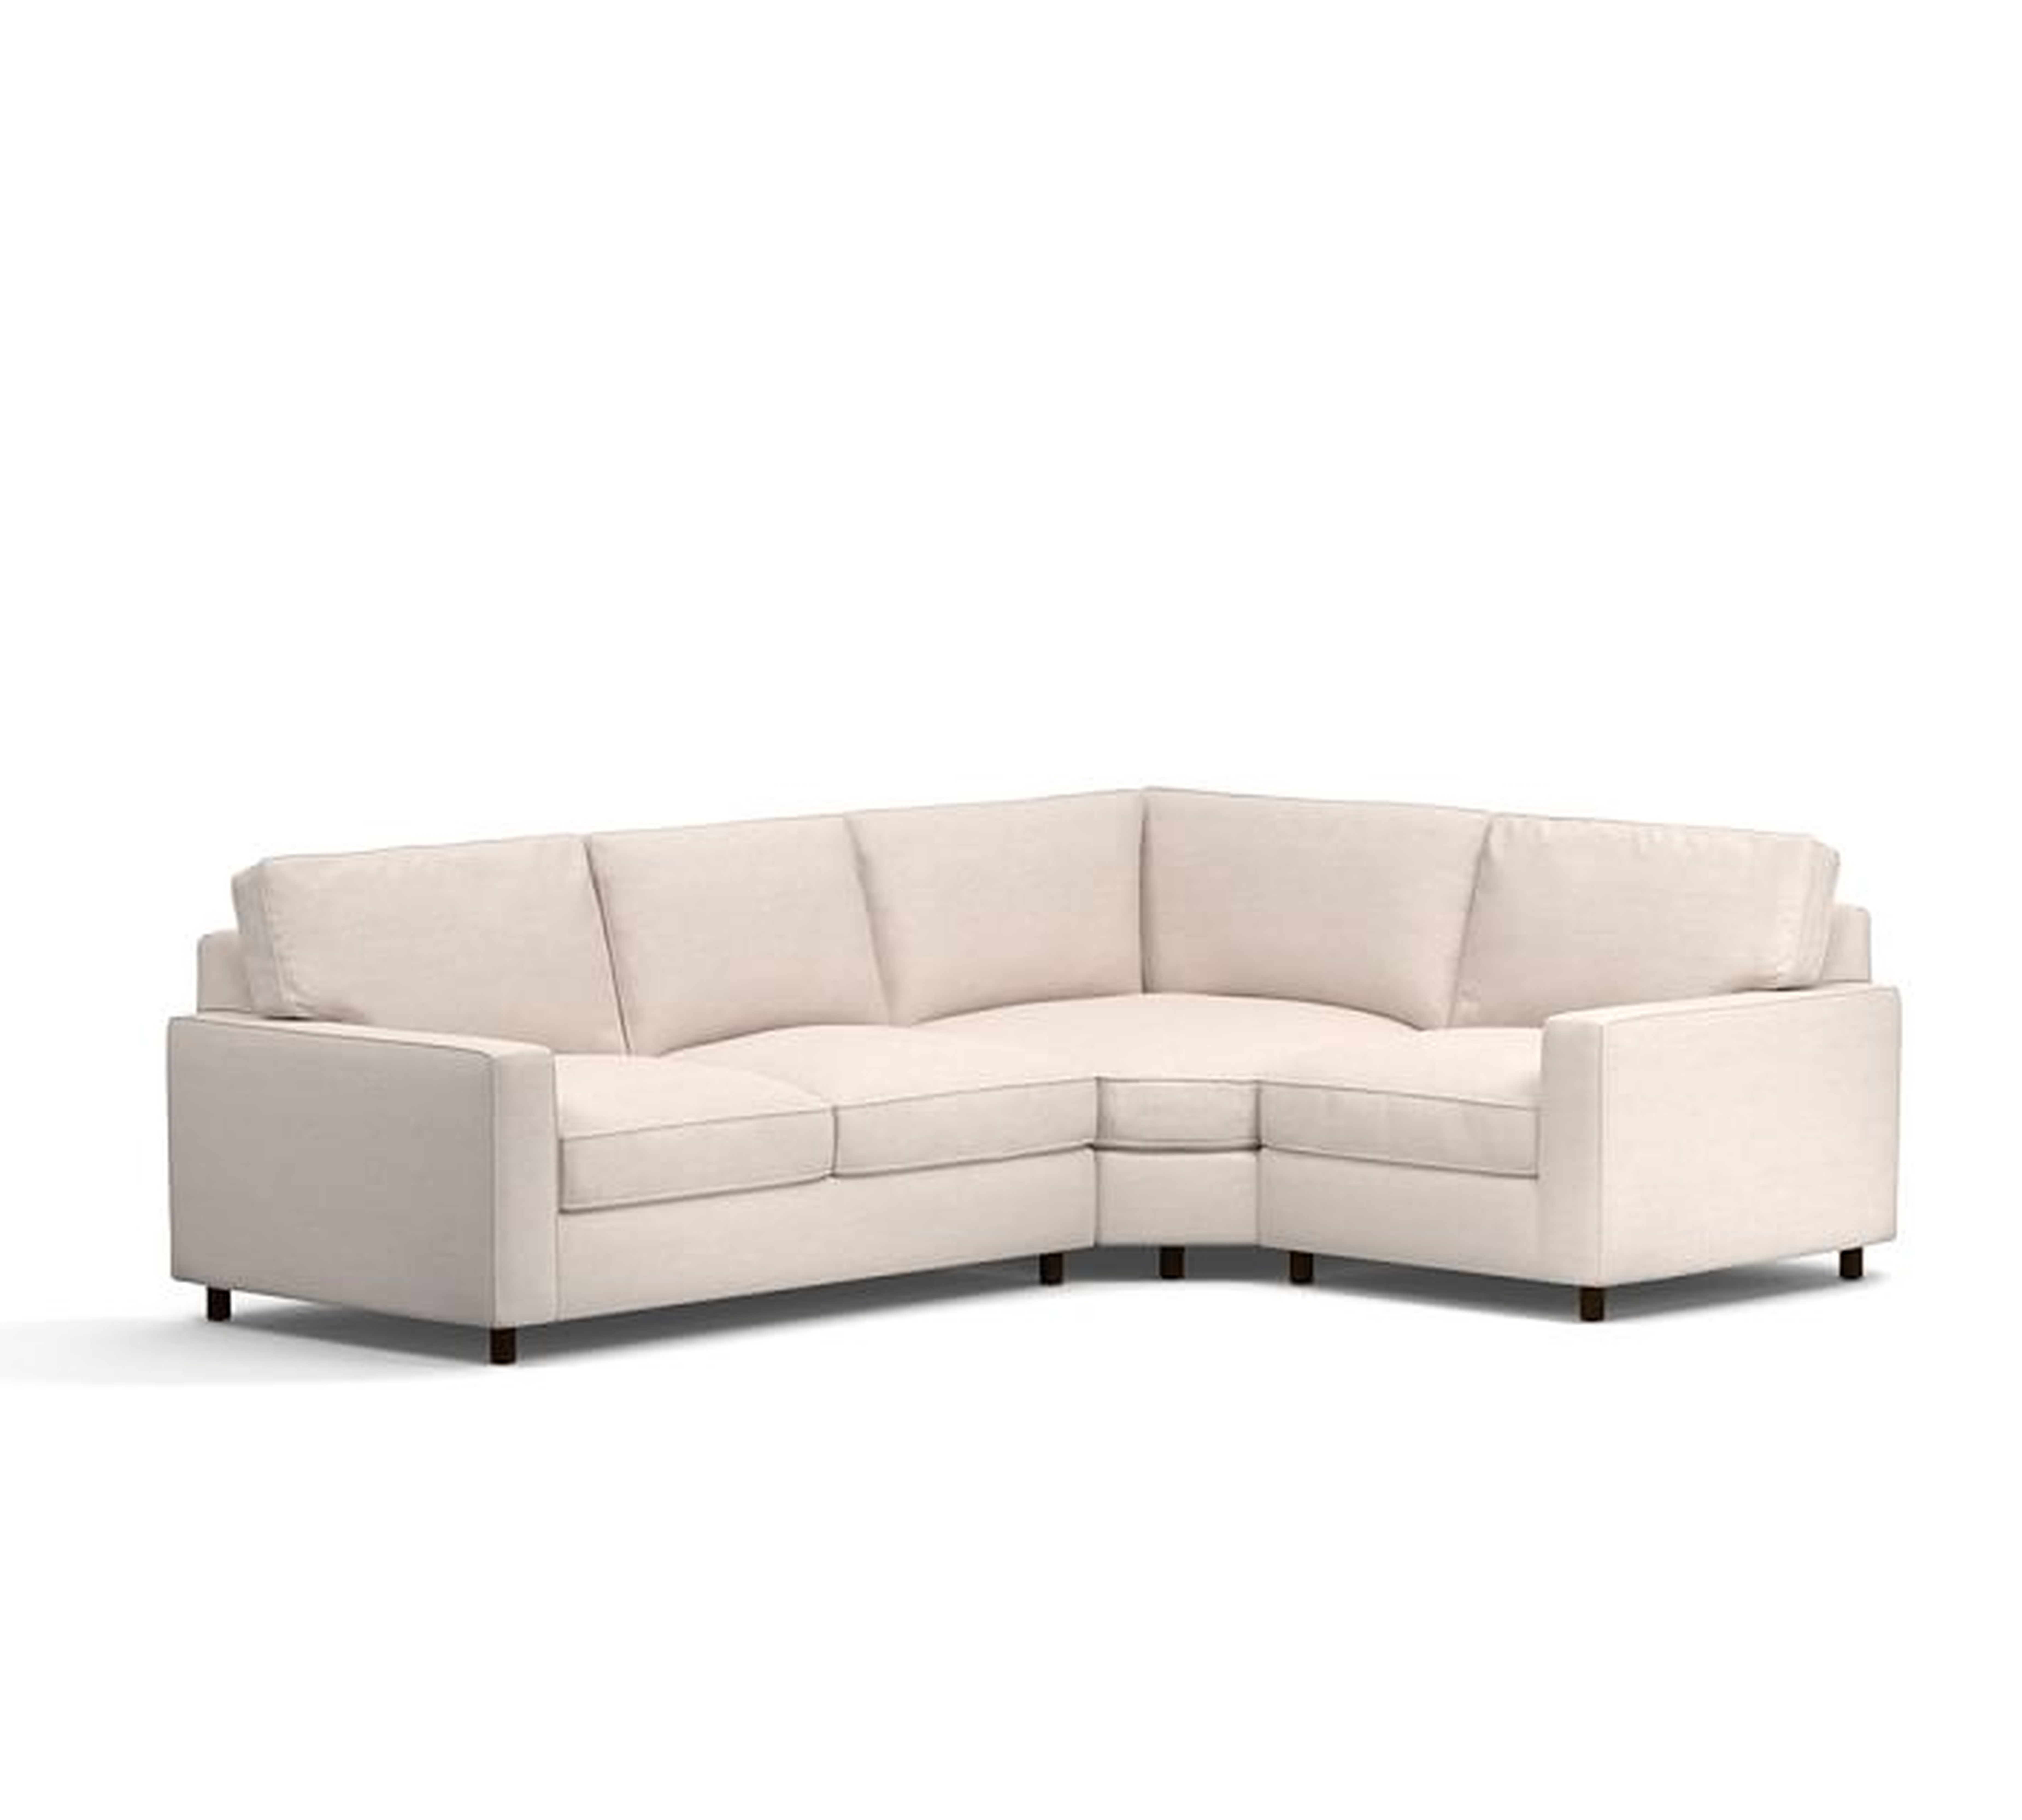 PB Comfort Square Arm Upholstered 3-Piece Sectional with Wedge, Left Arm Sofa + Wedge + Right Armchair, Box Edge,Memory Foam,Performance Brushed Basketweave, Oatmeal - Pottery Barn